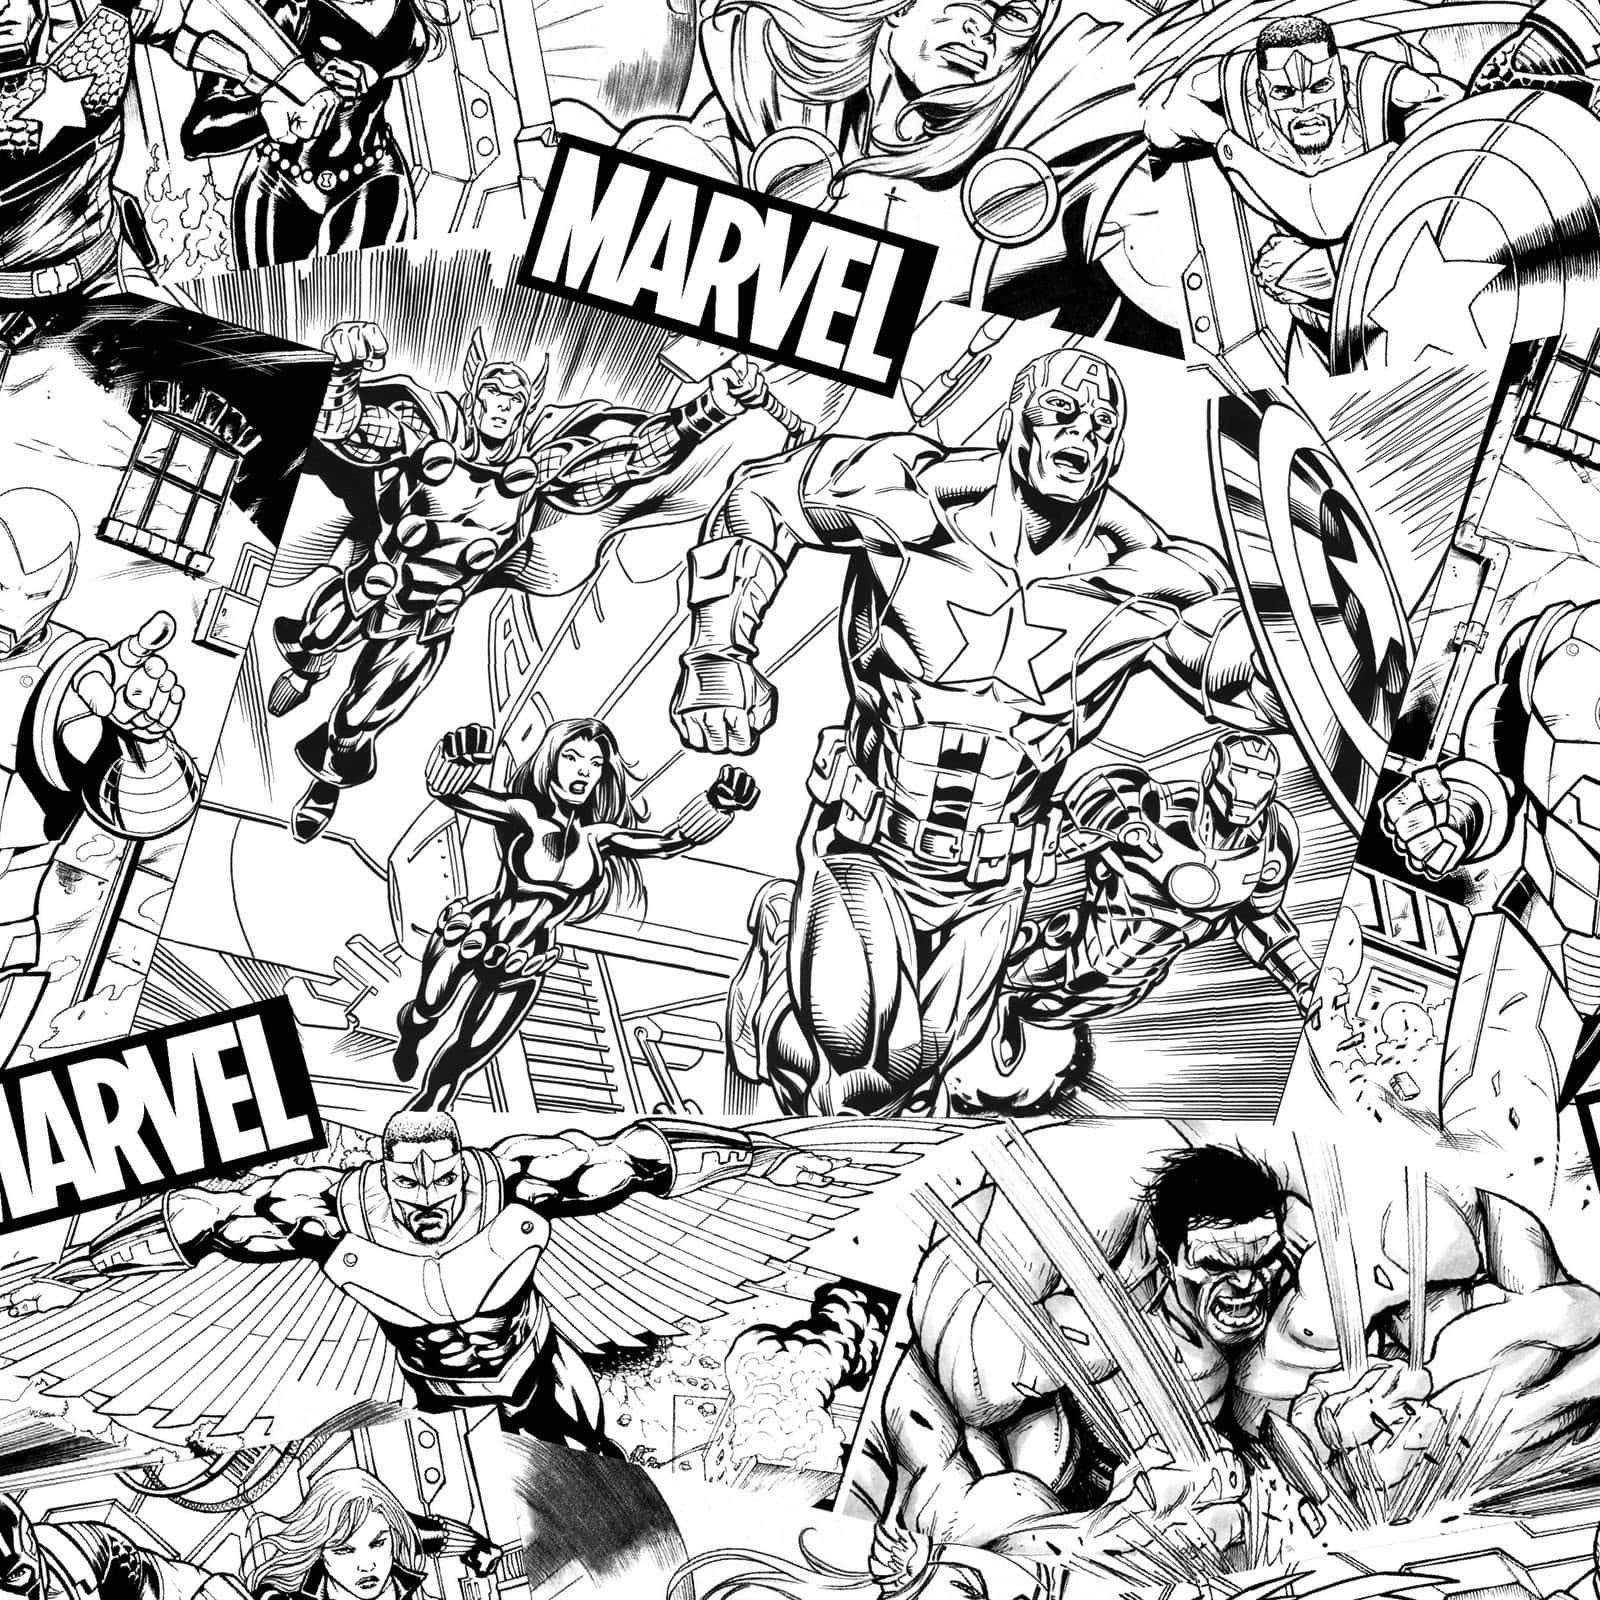 "Explore the Endless Possibilities in Marvel's Black and White World" Wallpaper